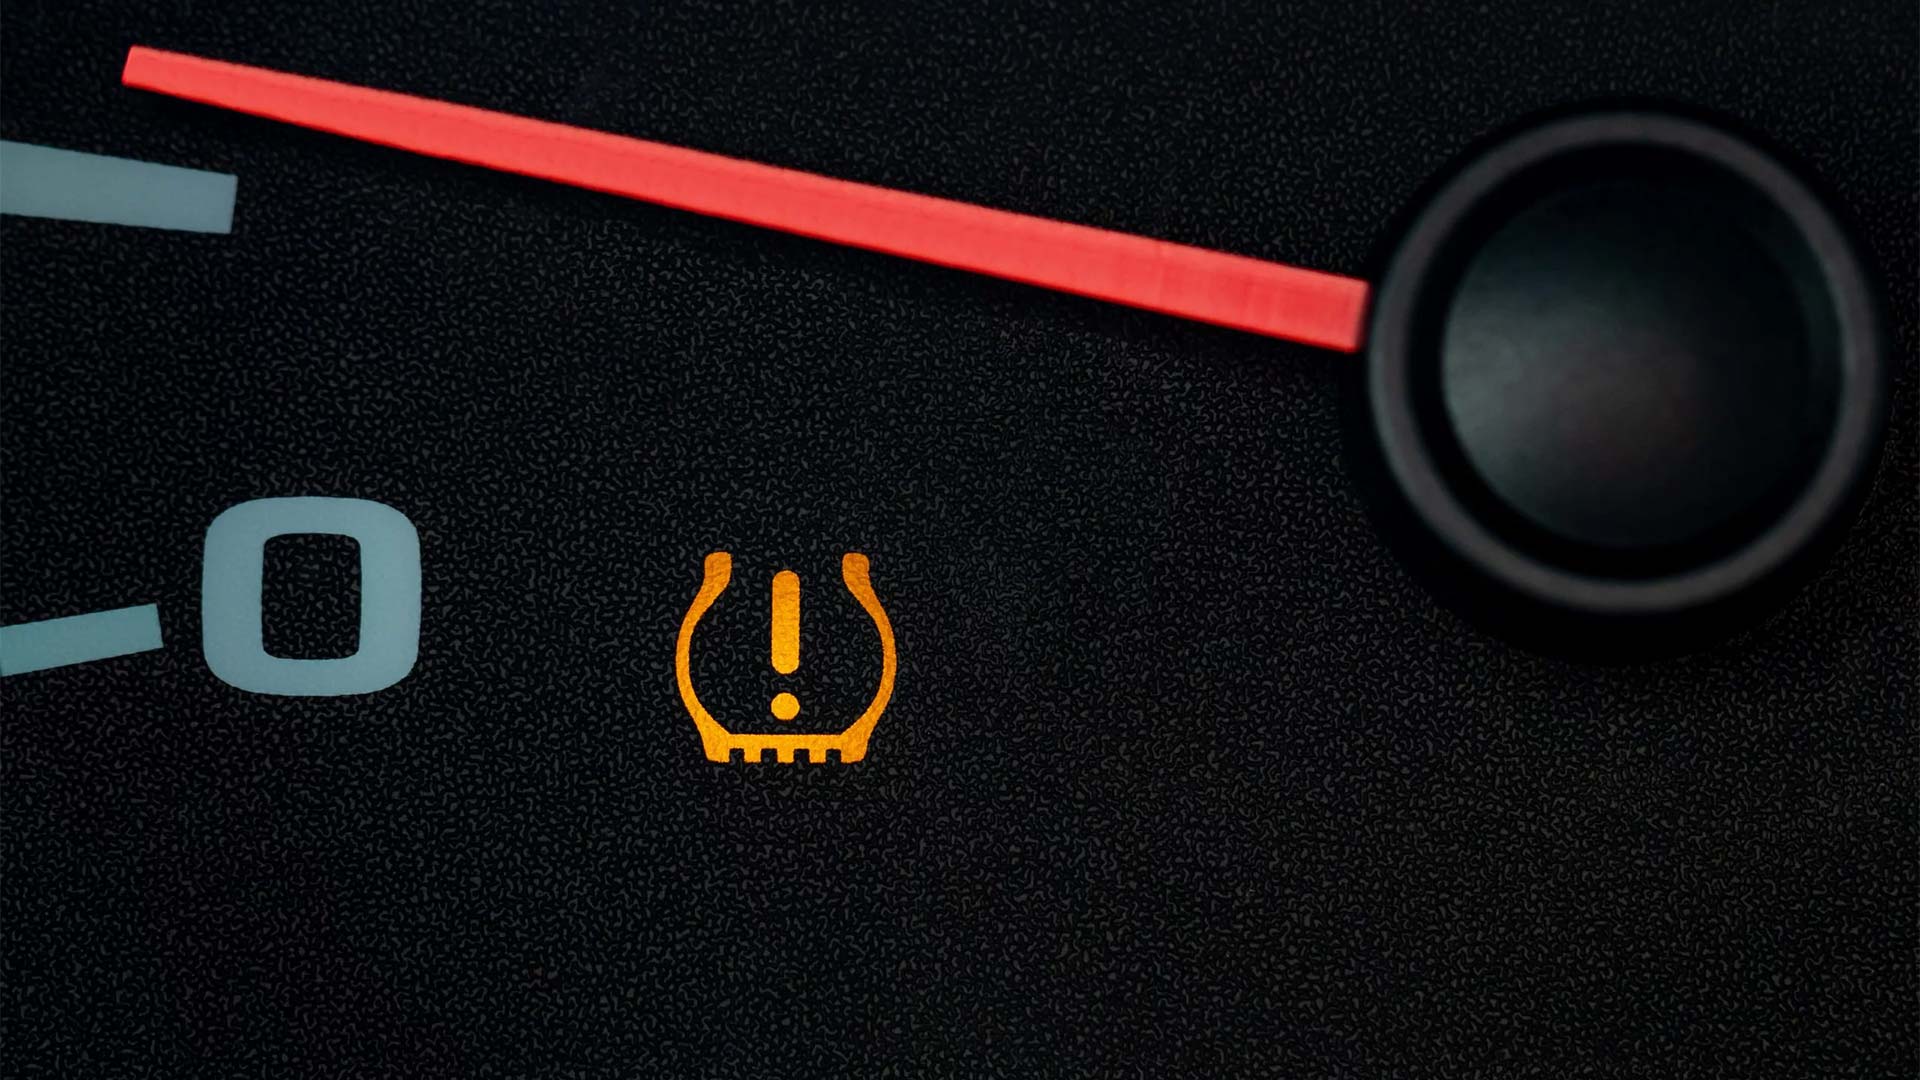 Image of a car dashboard with the low tire pressure warning light on